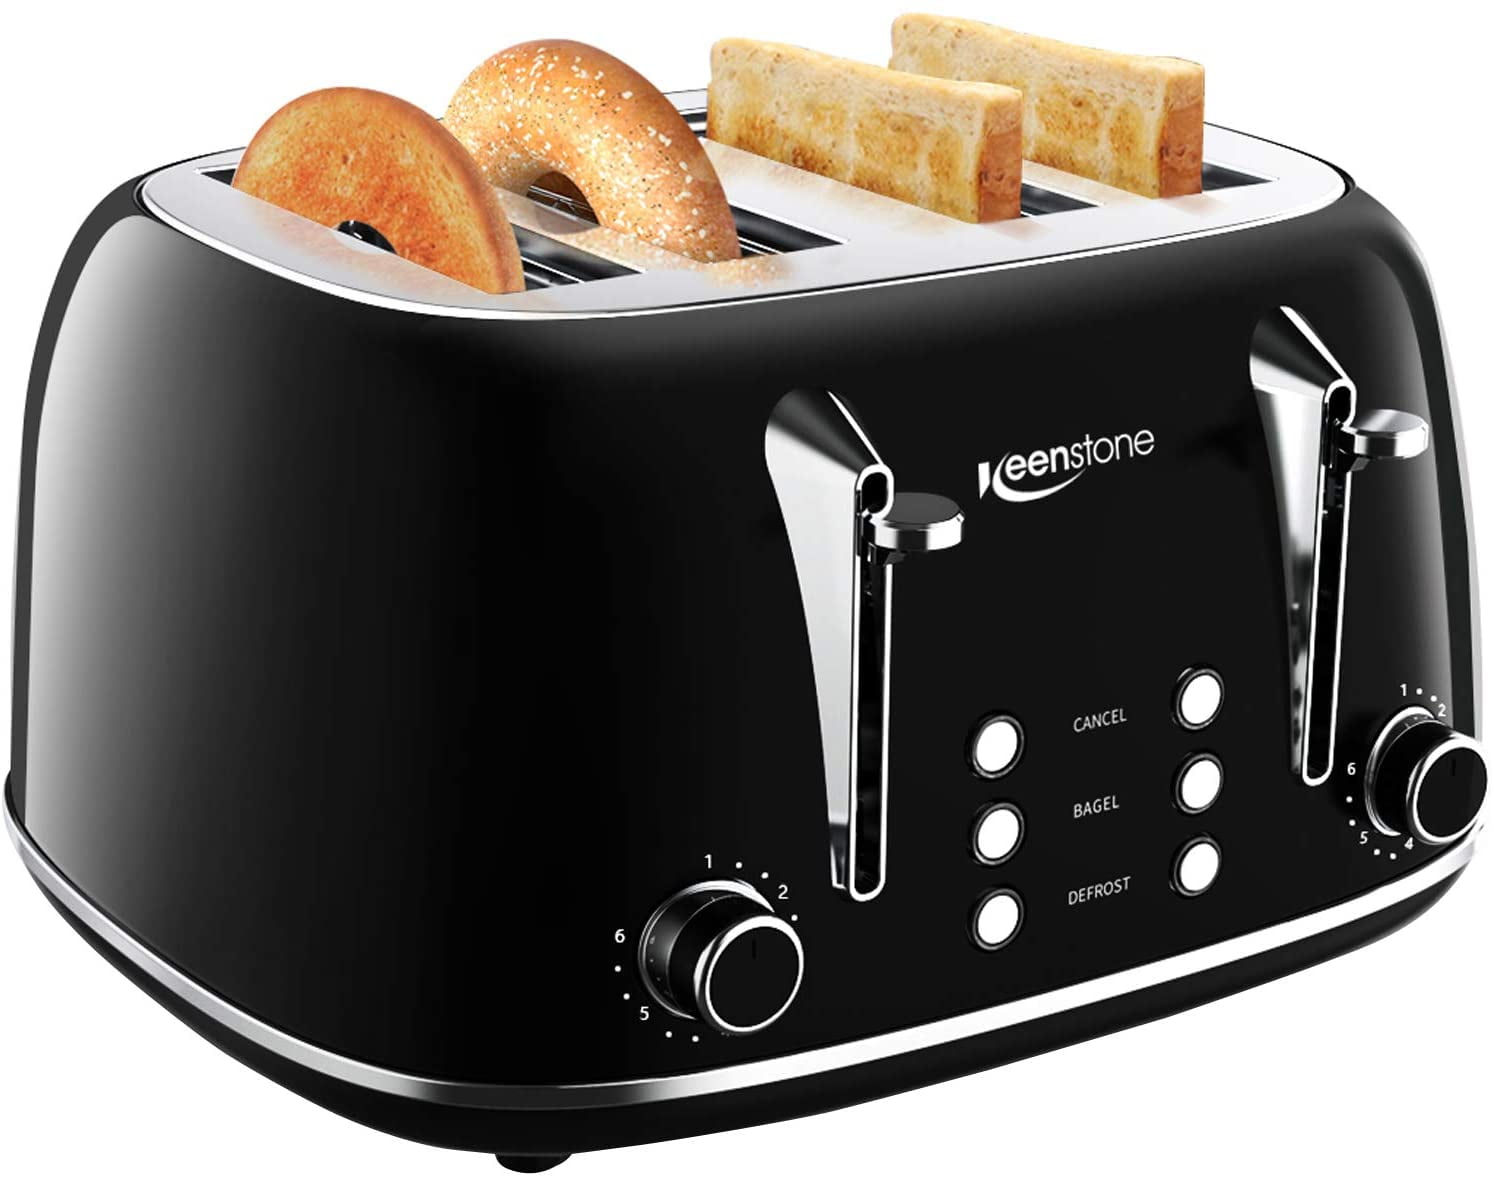 Keenstone Retro 4 Slots Stainless Steel Toaster With Bagel Can Toaster 4 Slice